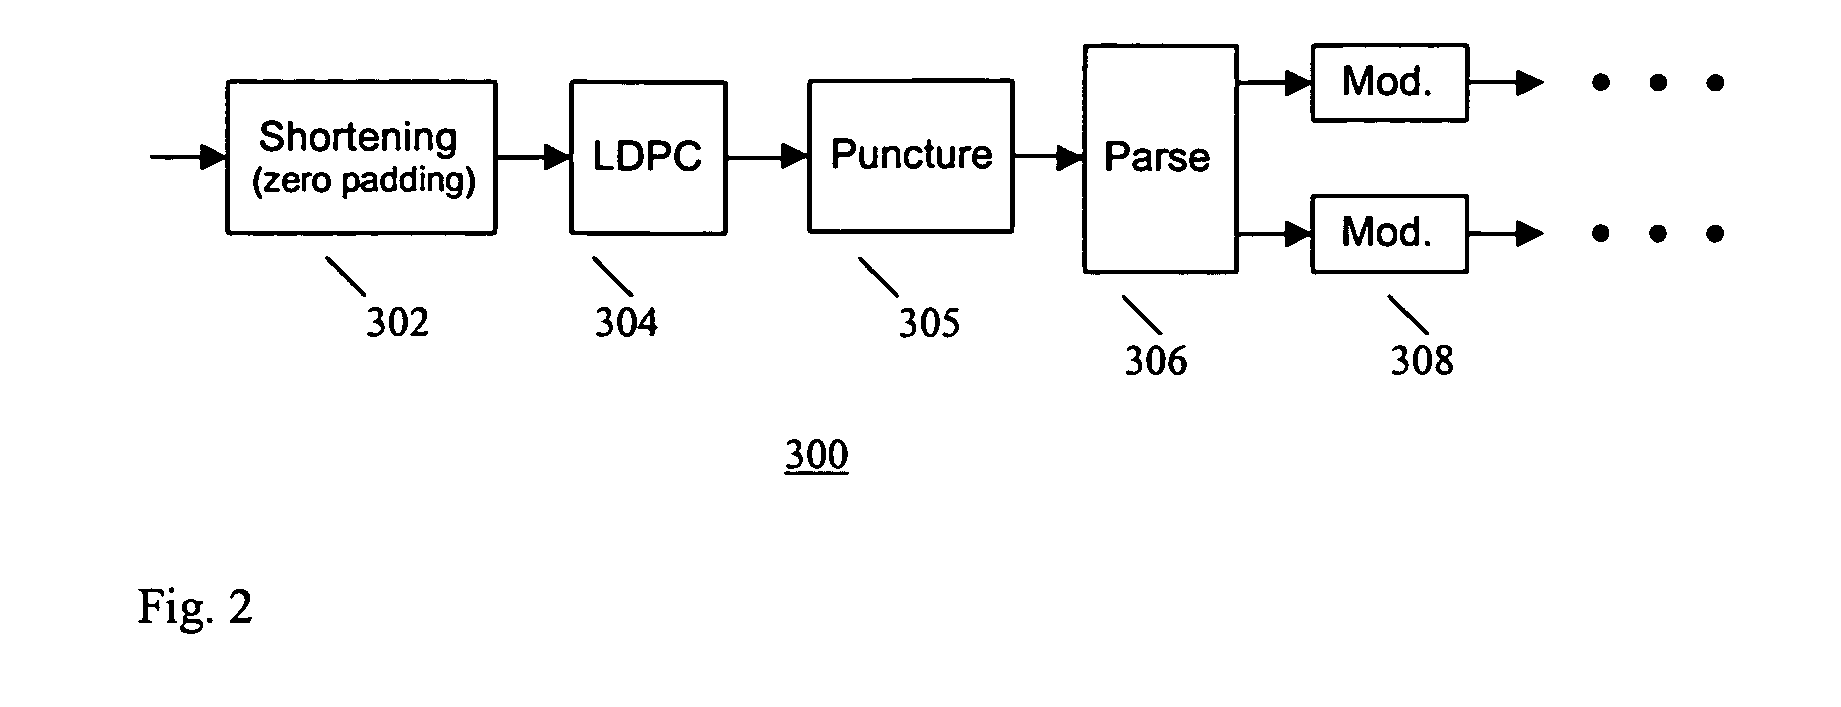 LDPC concatenation rules for 802.11n systems